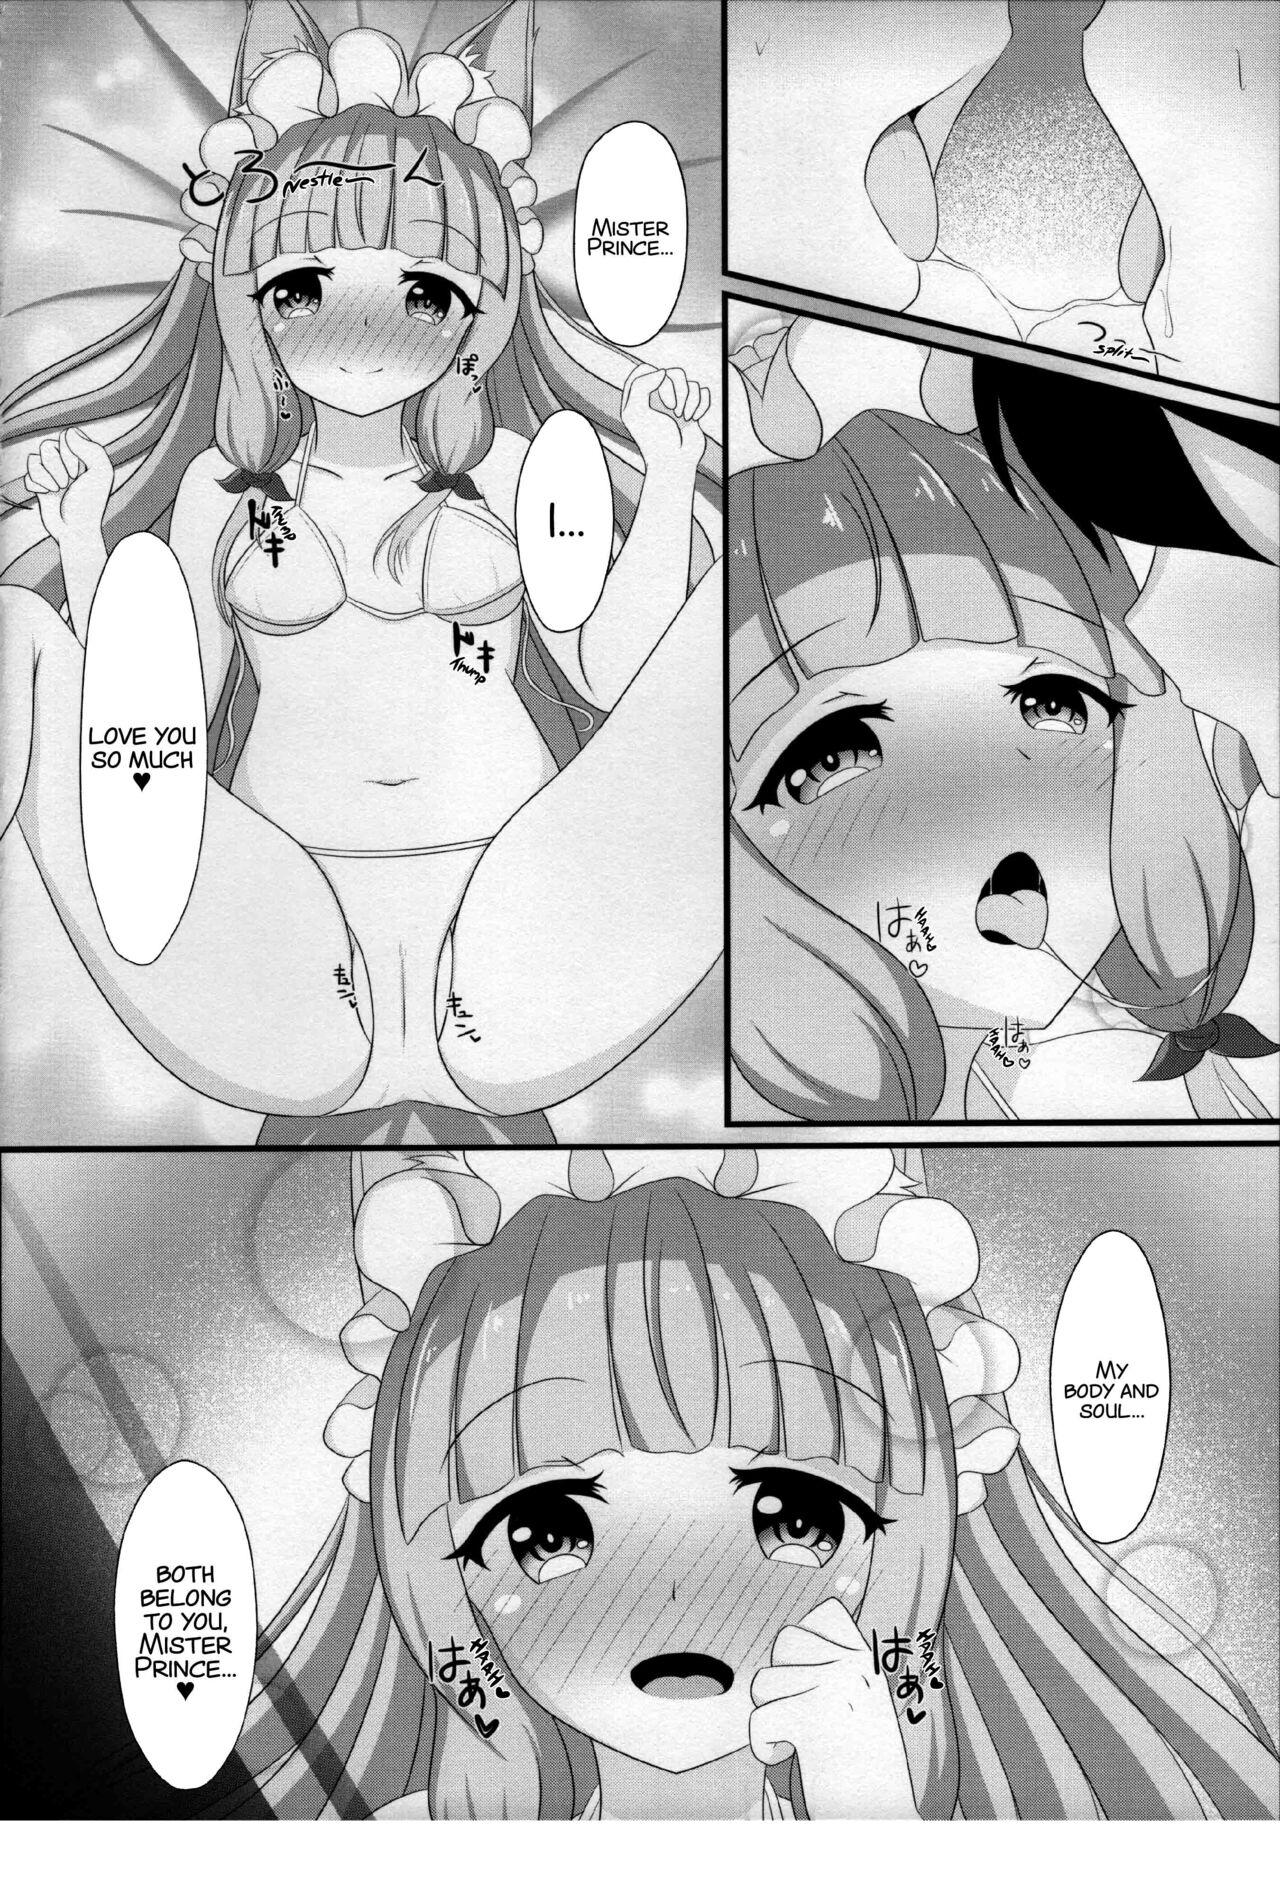 Beauty Maho Hime Connect! 2 - Princess connect Assfucking - Page 9